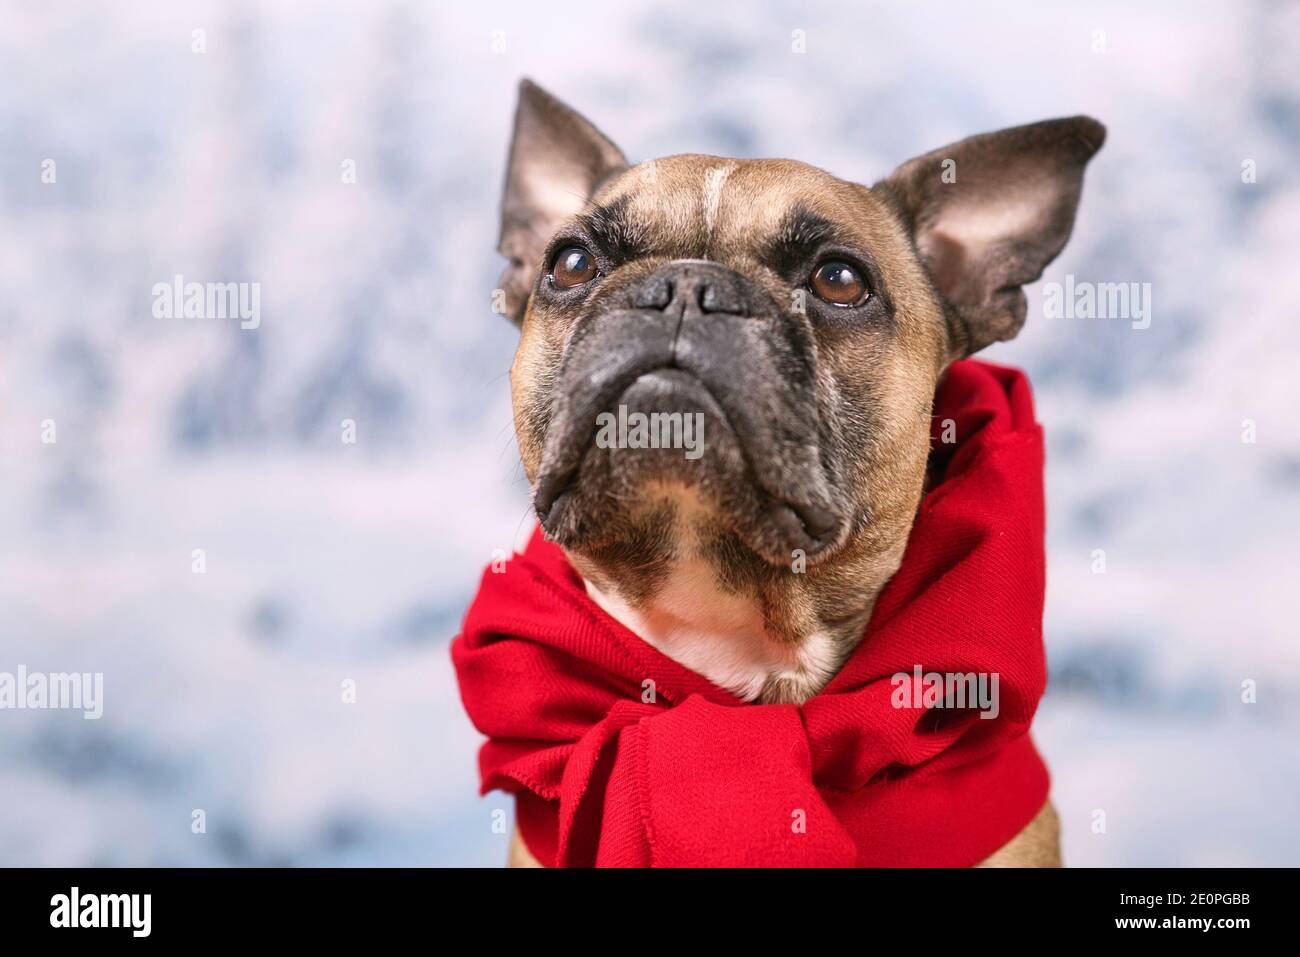 French Bulldog dog with red winter scarf around neck in front of blurry snow background Stock Photo